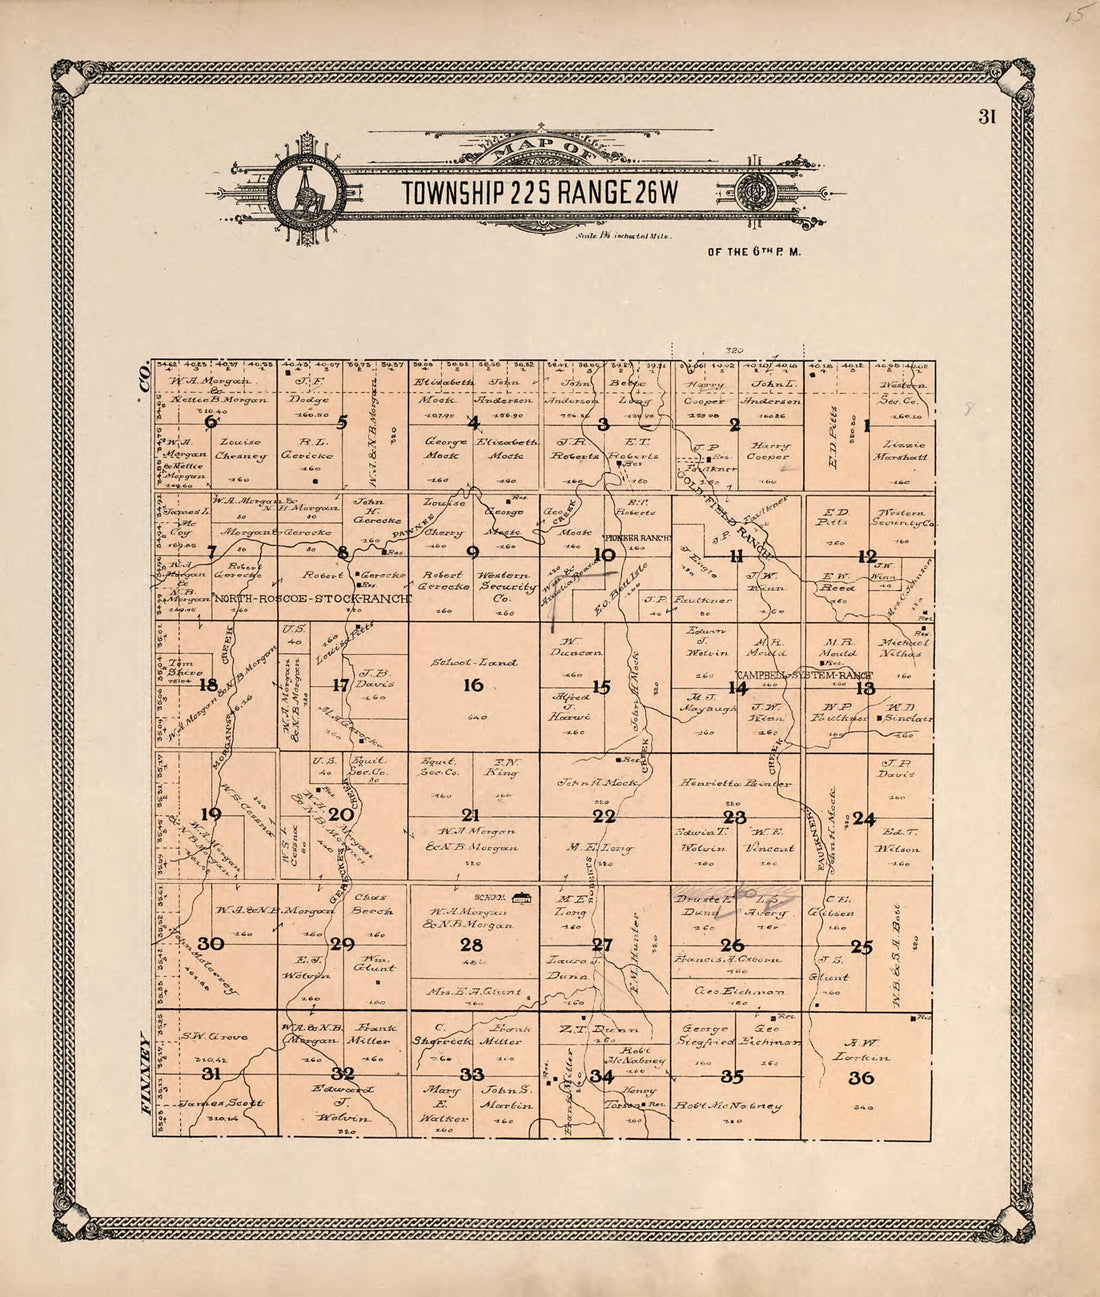 This old map of Map of Township 22 S Range 26 W from Standard Atlas of Hodgeman County, Kansas from 1907 was created by  Geo. A. Ogle &amp; Co in 1907